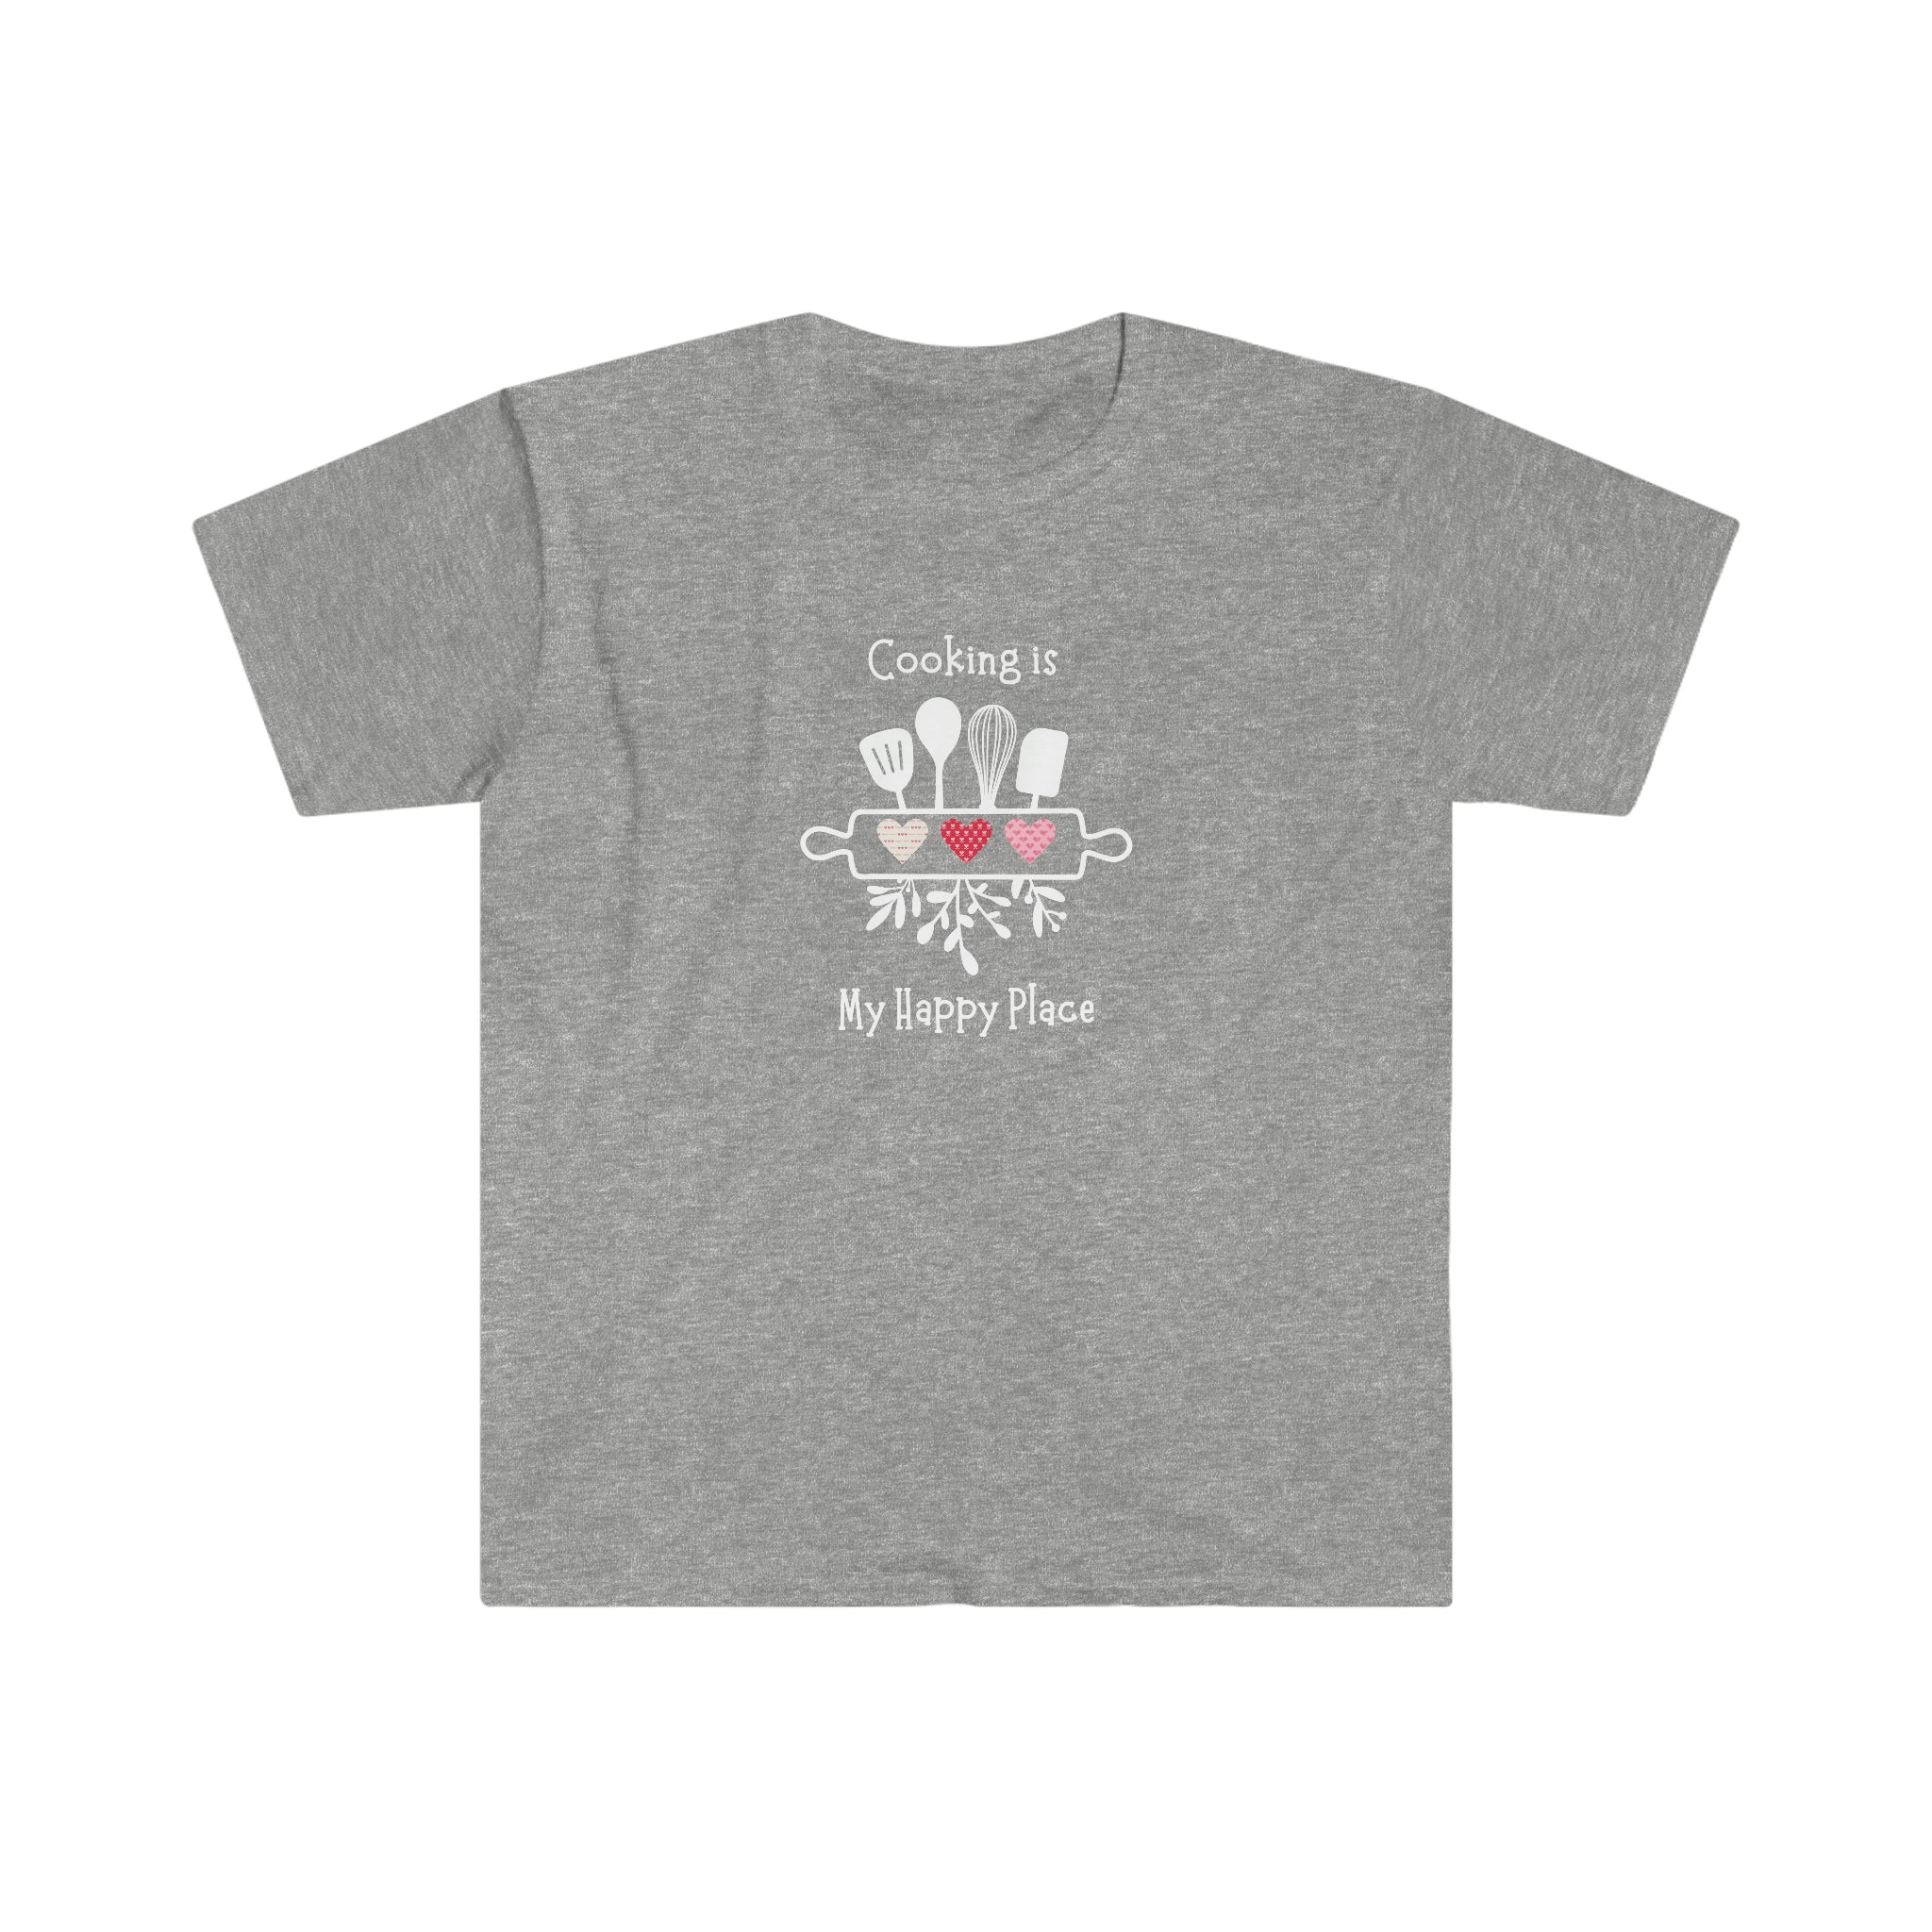 T-shirt, super soft, "Cooking is My Happy Place" T-Shirt - Comfortable, Chic and Playful - cooking t-shirt #5